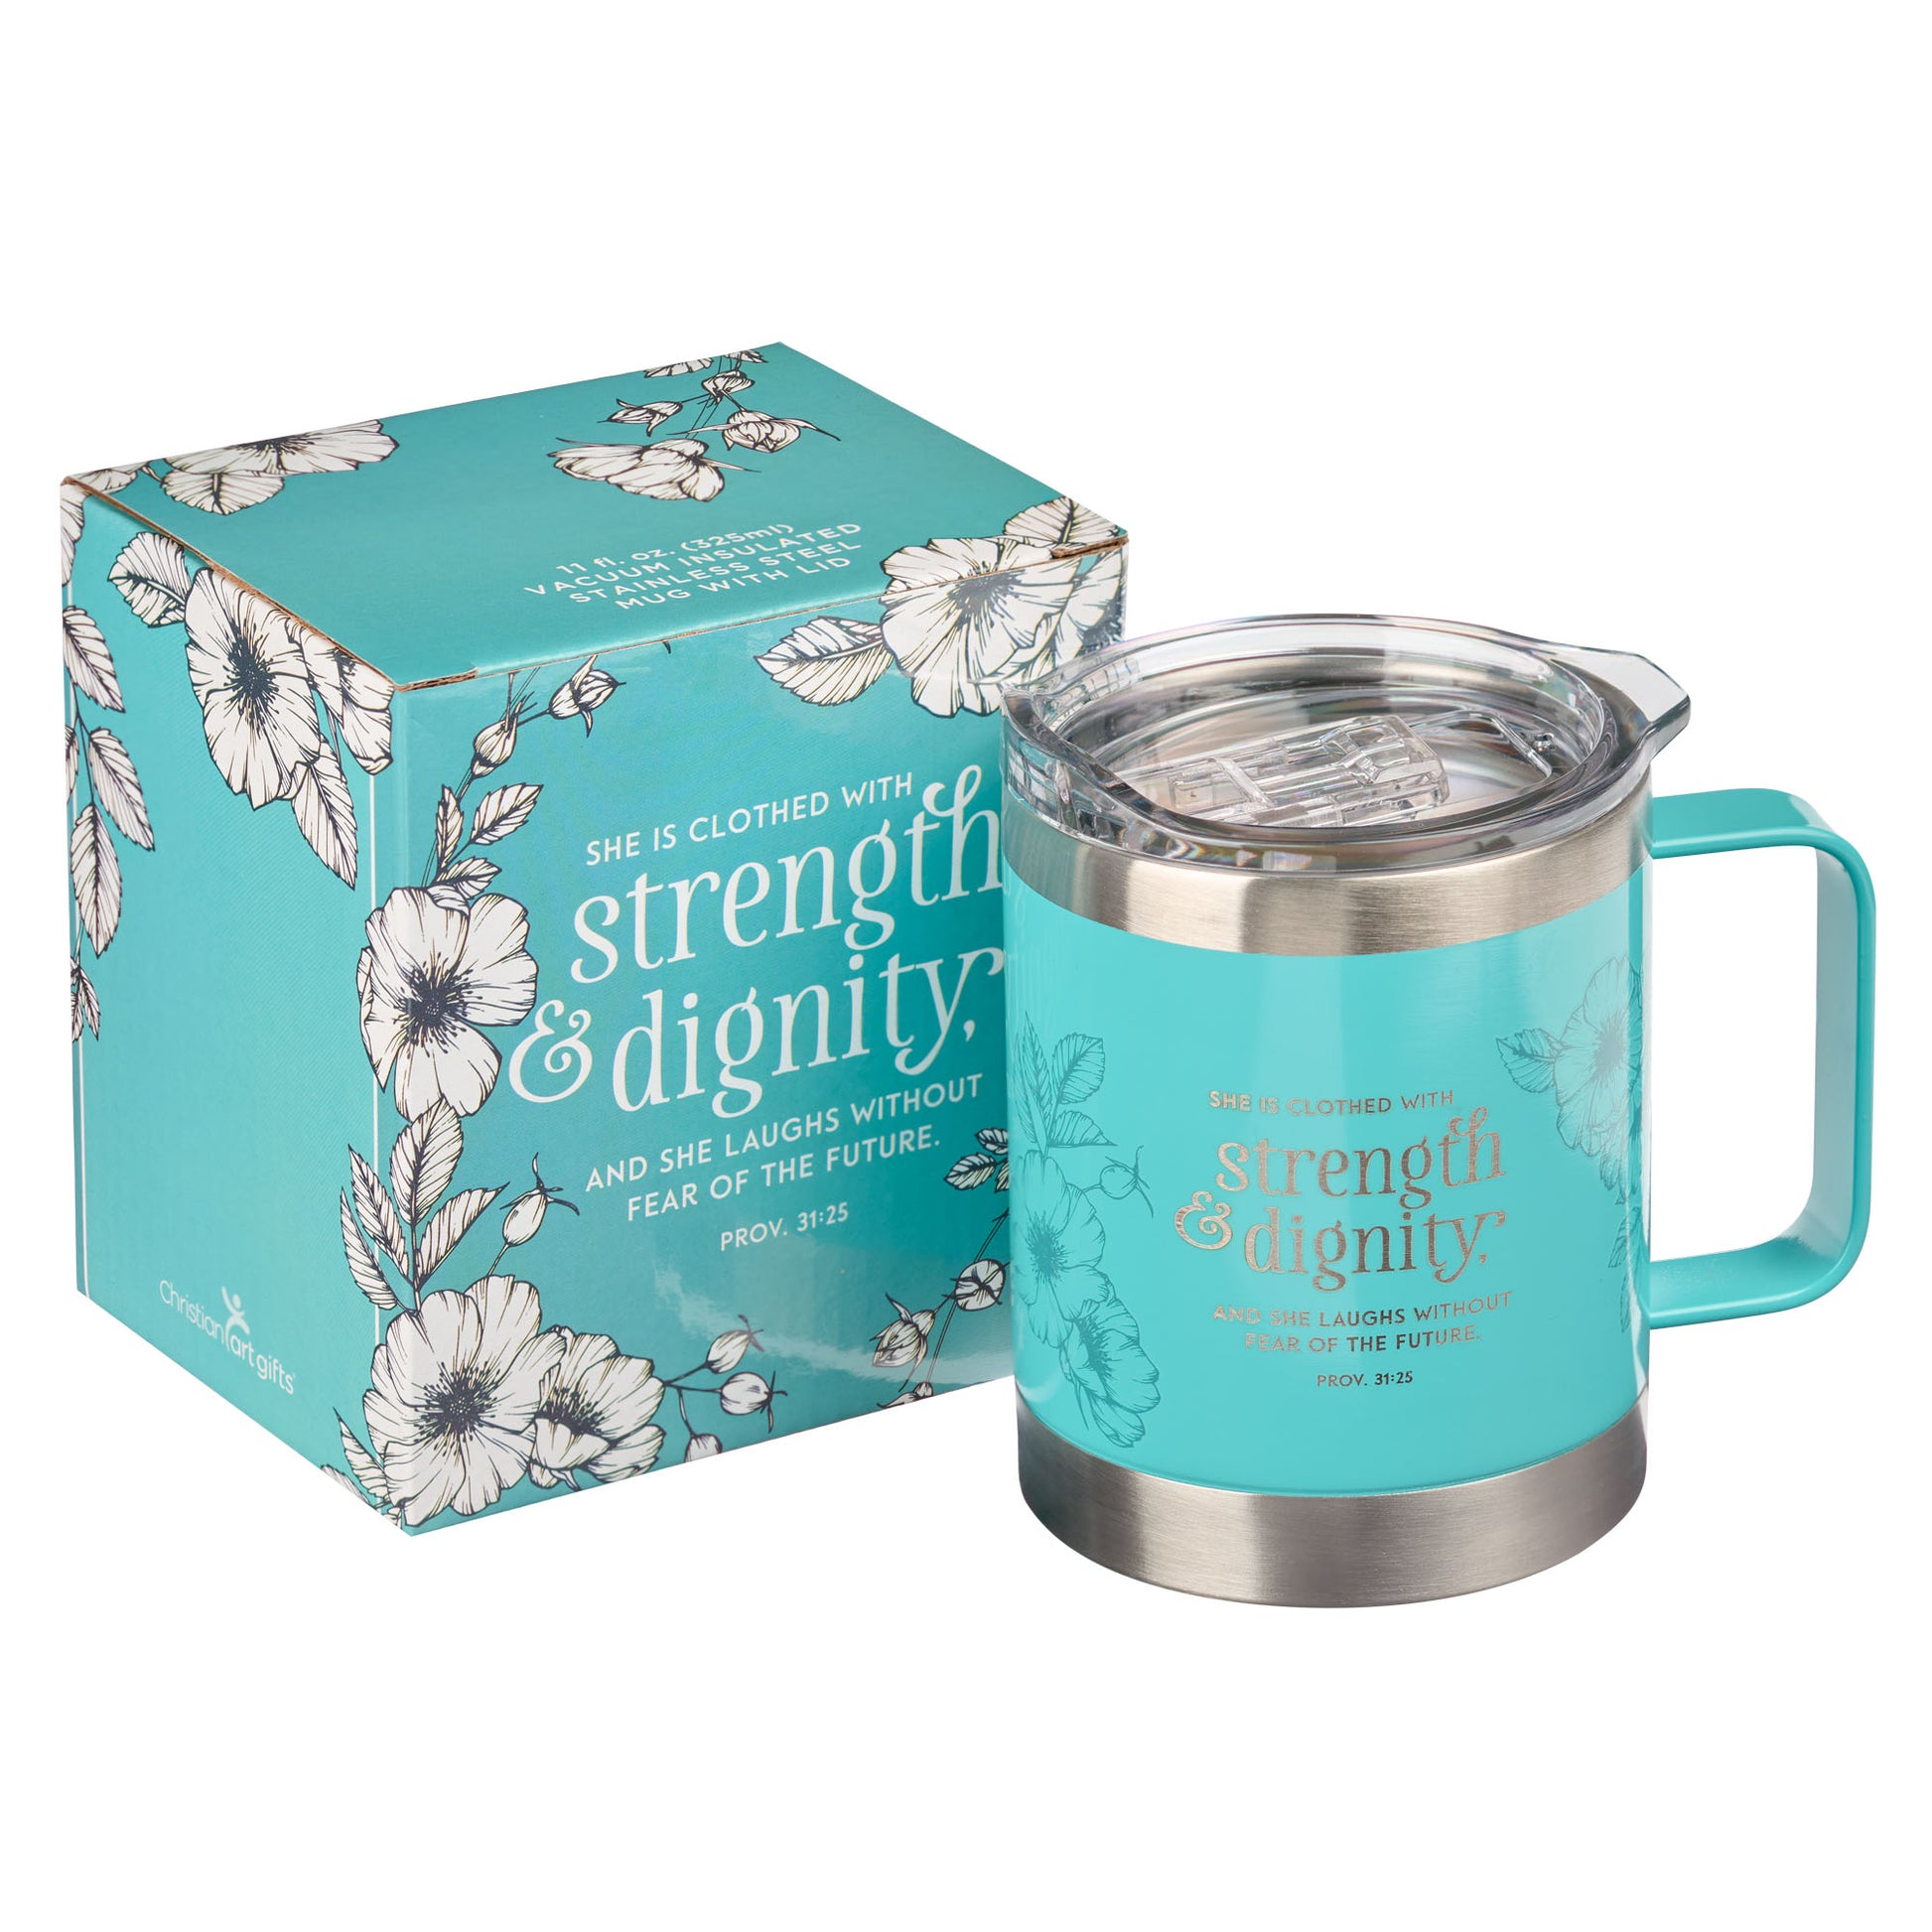 Strength & Dignity Teal Camp-style Stainless Steel Mug - Proverbs 31:25 - The Christian Gift Company